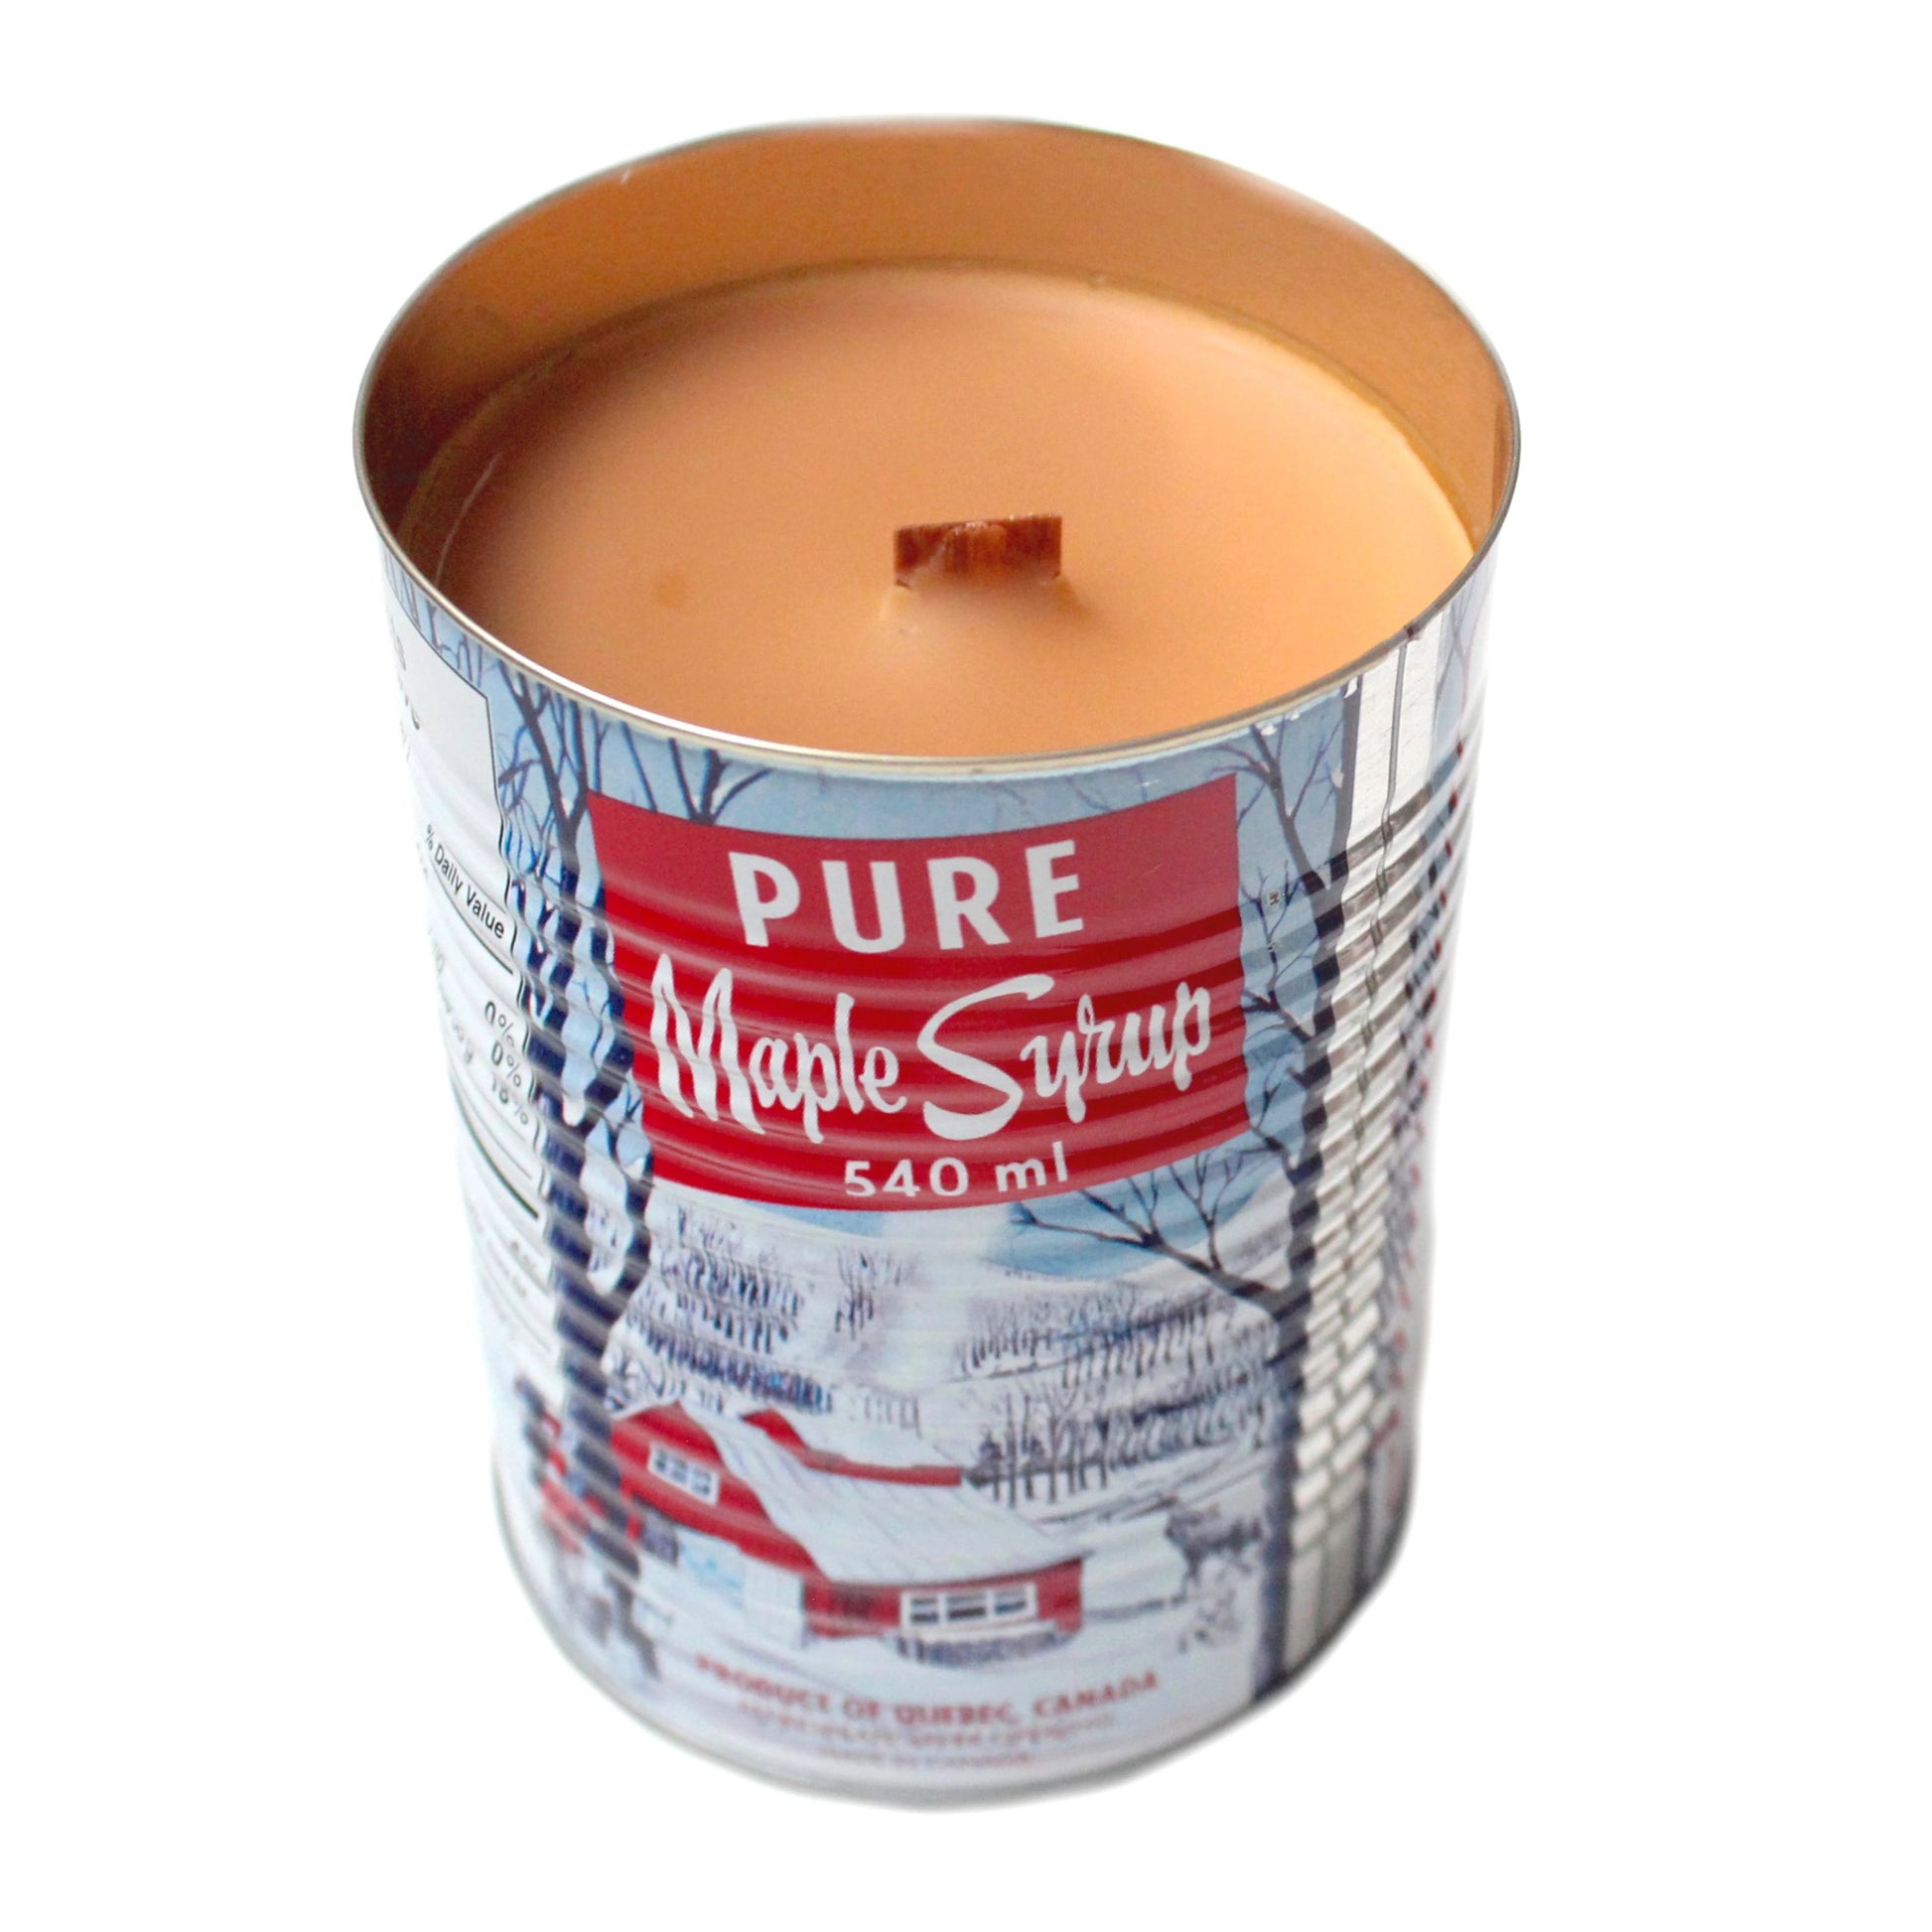 Made in Canada maple syrup tin candle with wooden wick. 